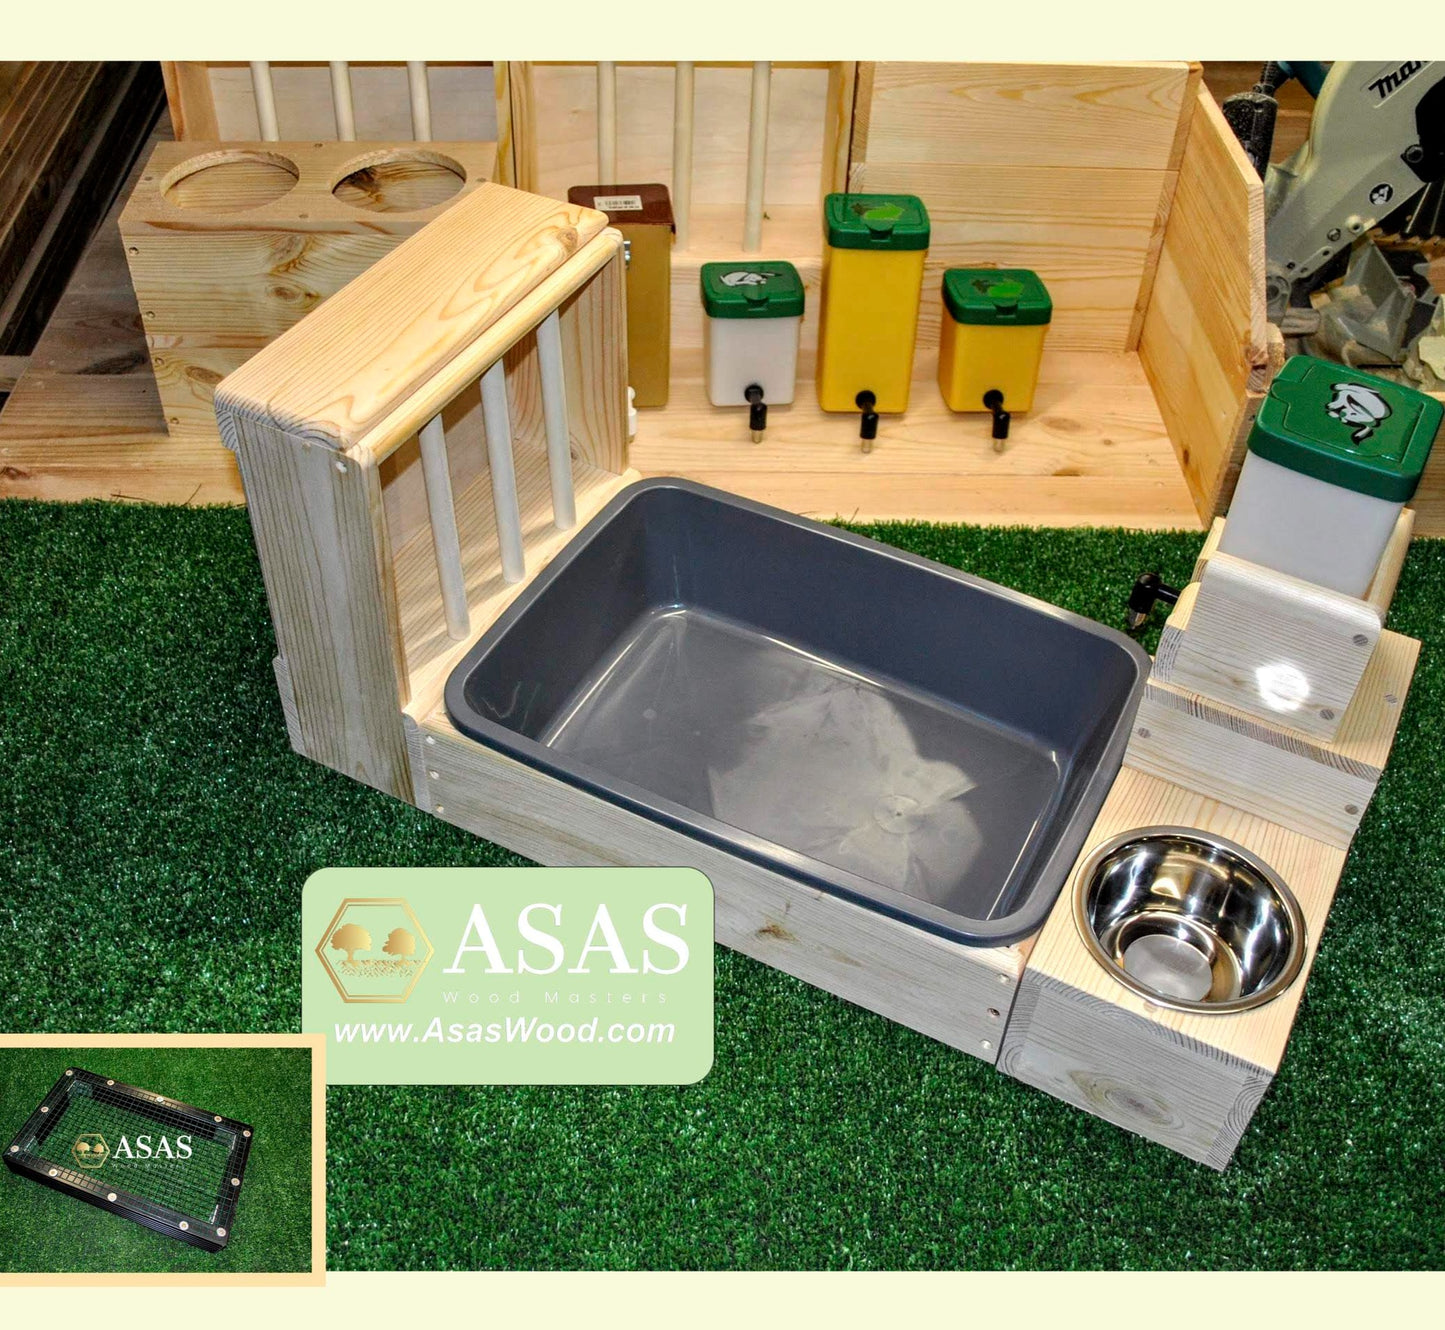 nipple bottle drink and food bowls station with hay feeder and litter box for pet rabbits